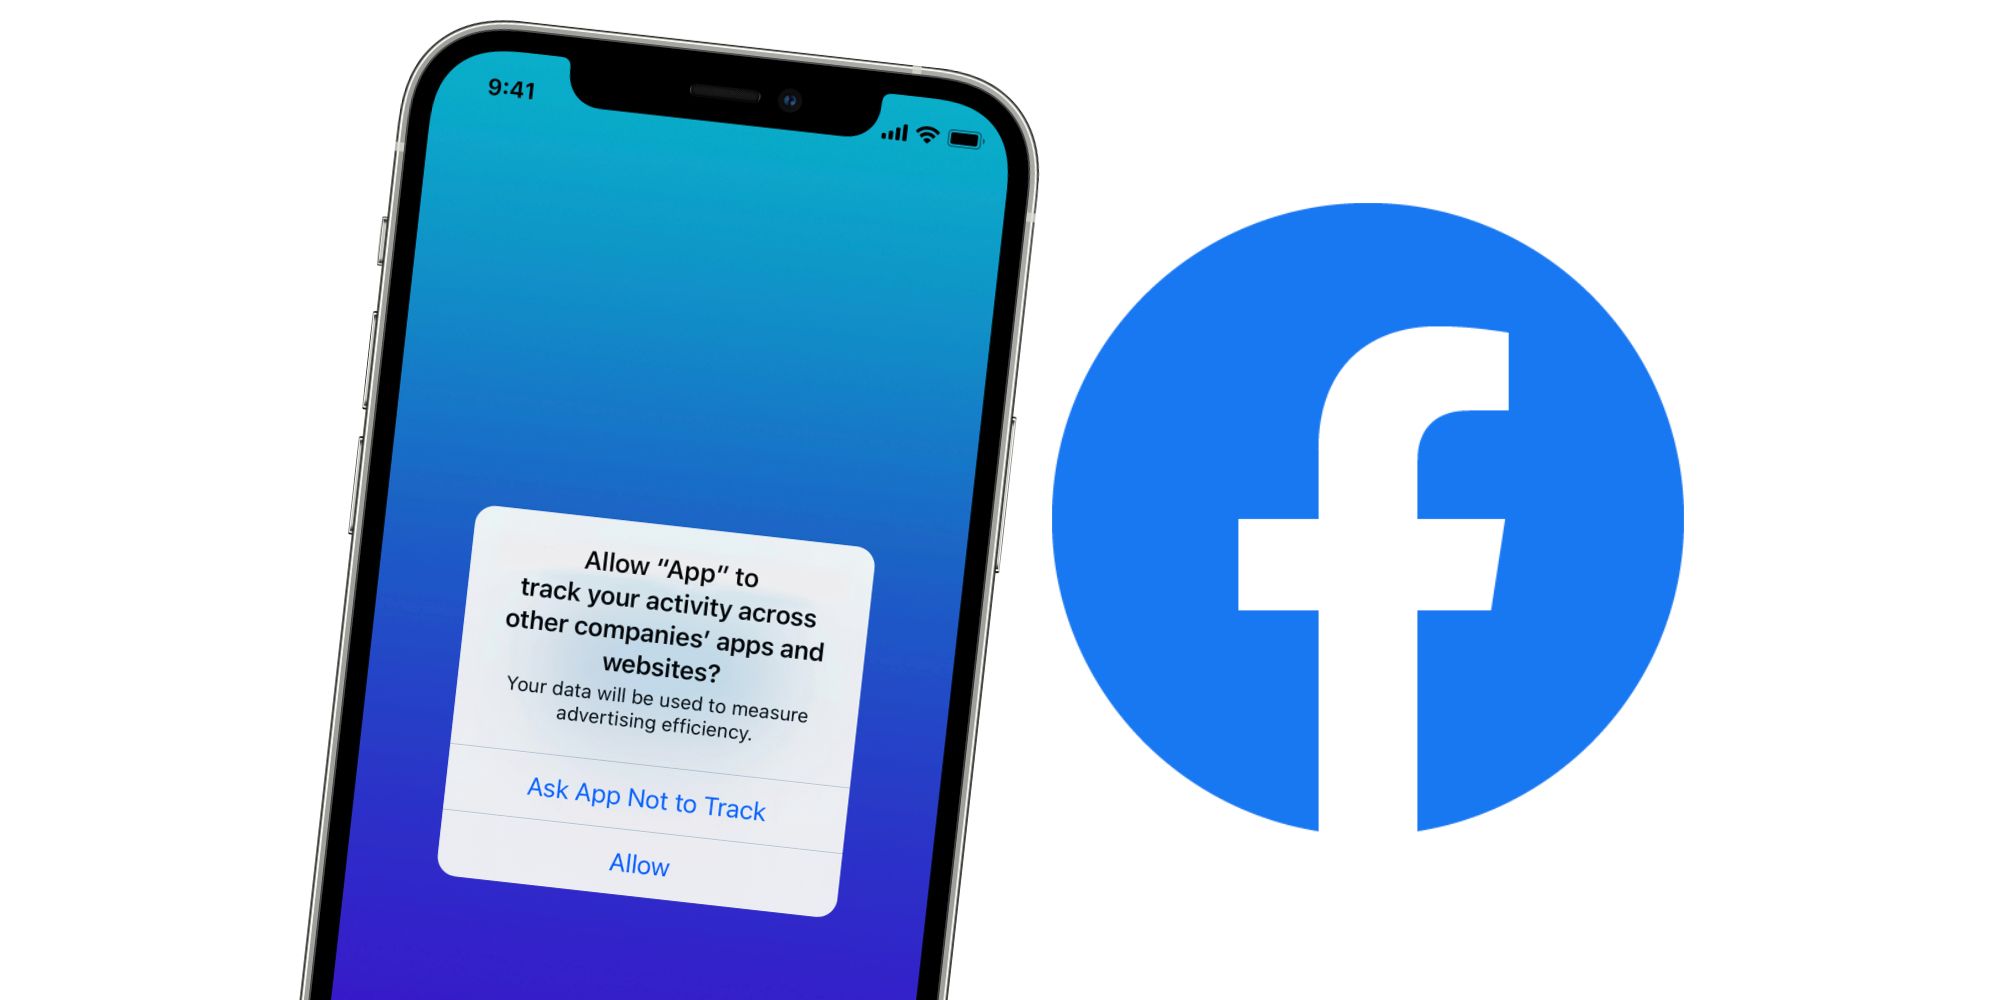 iOS 14.5 app tracking request with Facebook logo